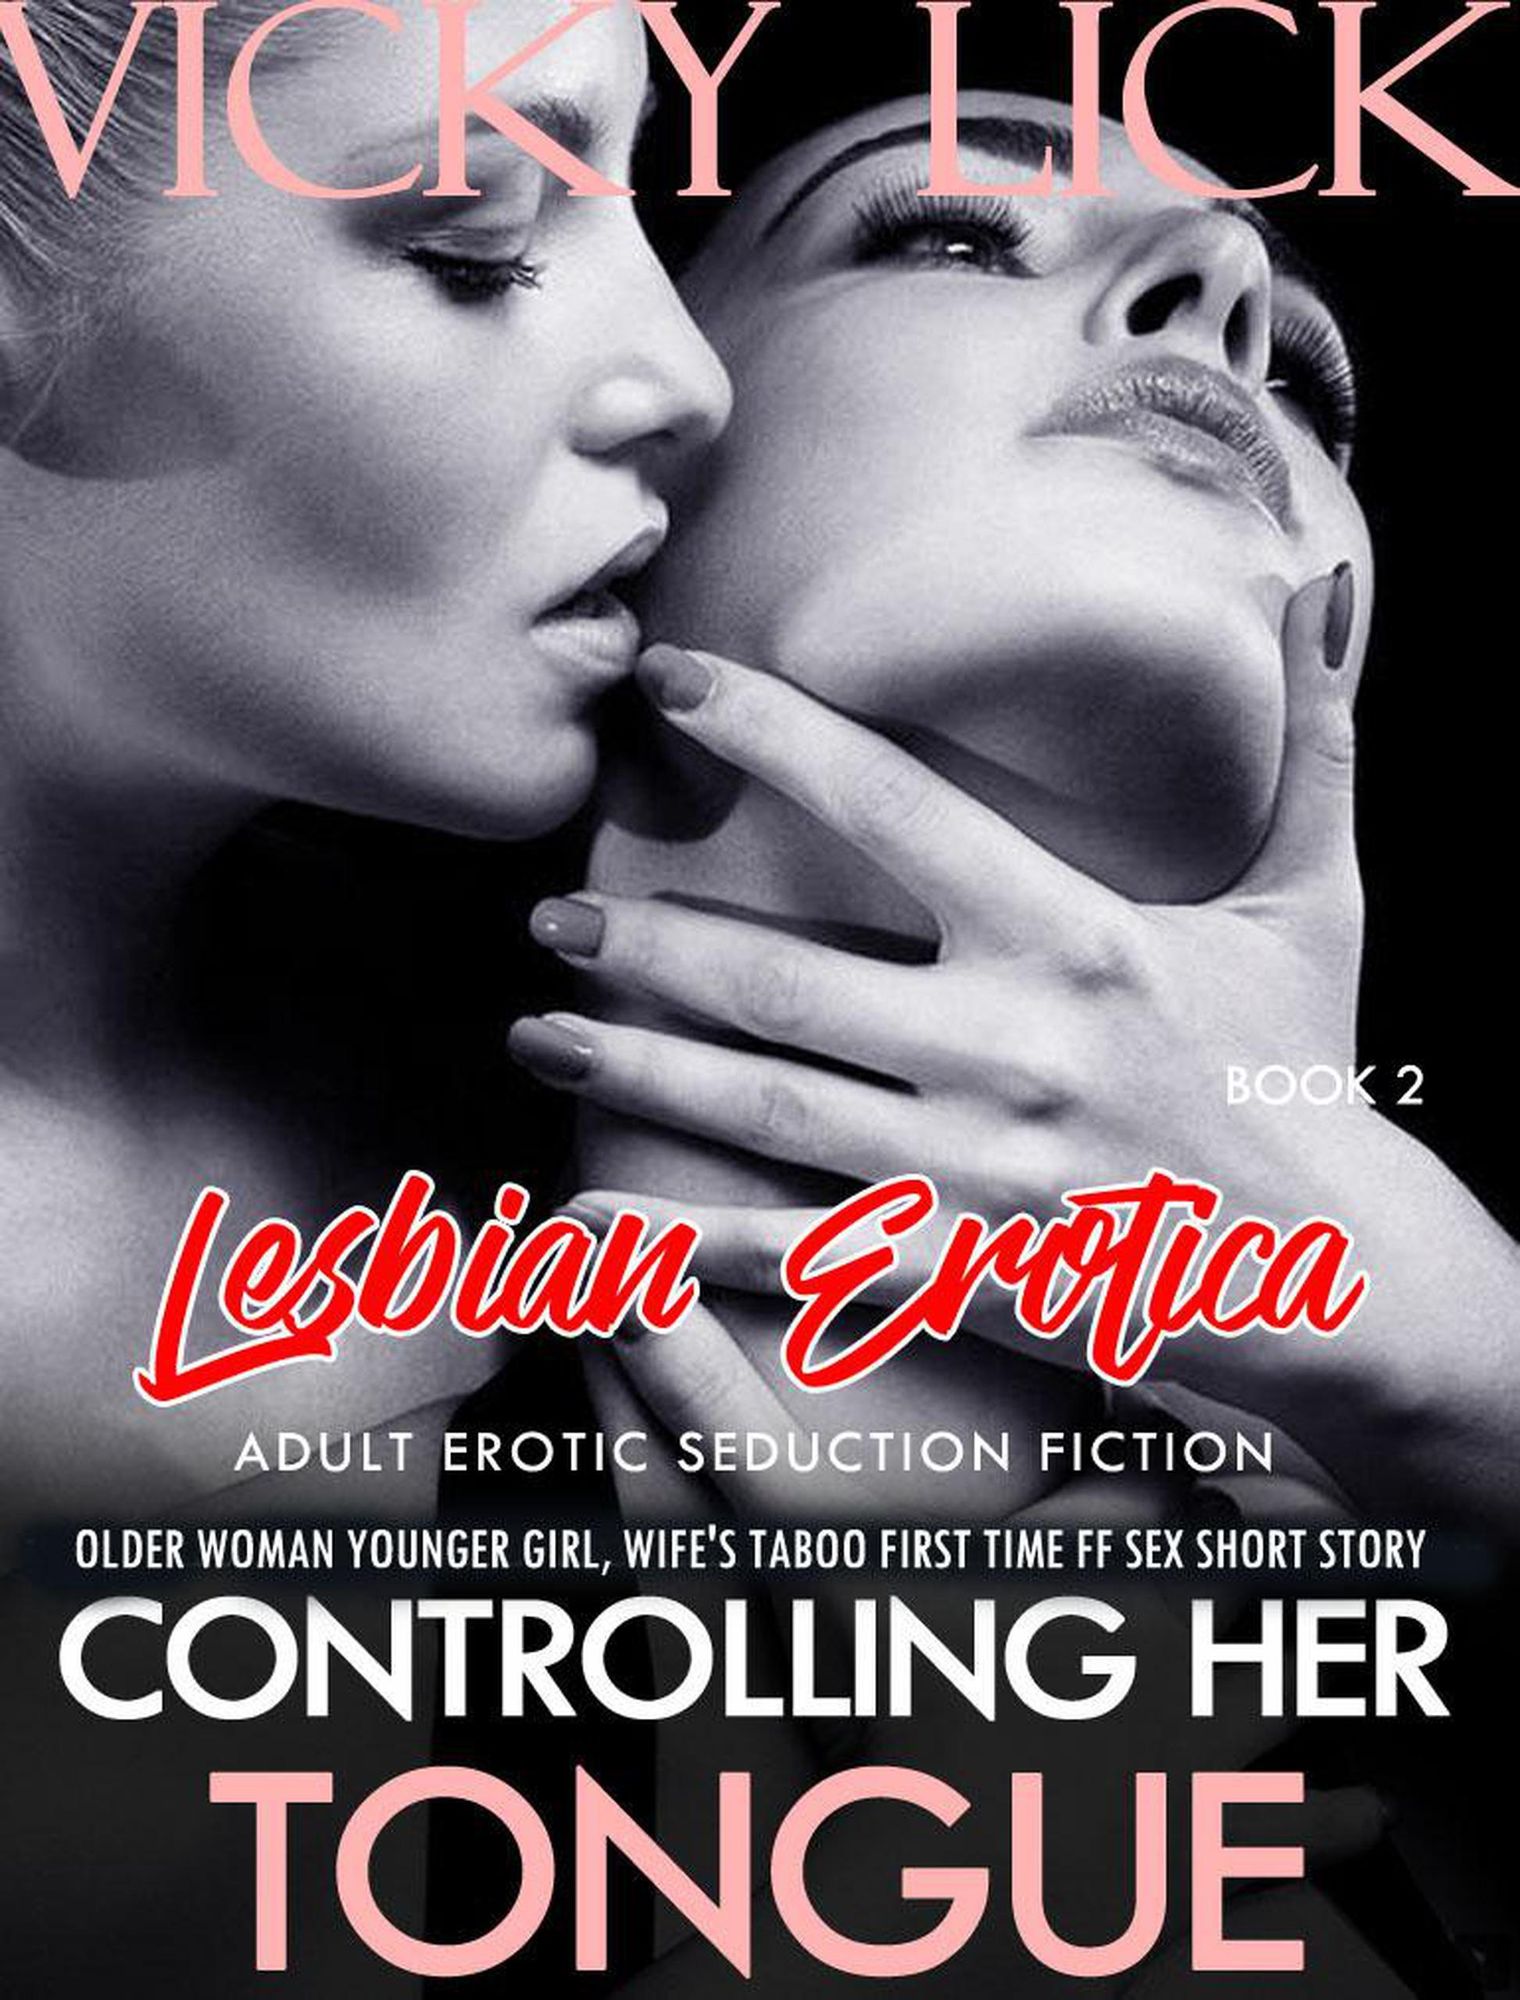 Lesbian Erotica Controlling Her Tongue - Older Woman Younger Girl, Wifes Taboo First Time FF Sex Short Story (Adult Erotic Seduction Fiction, #2) von Vicky Lick pic